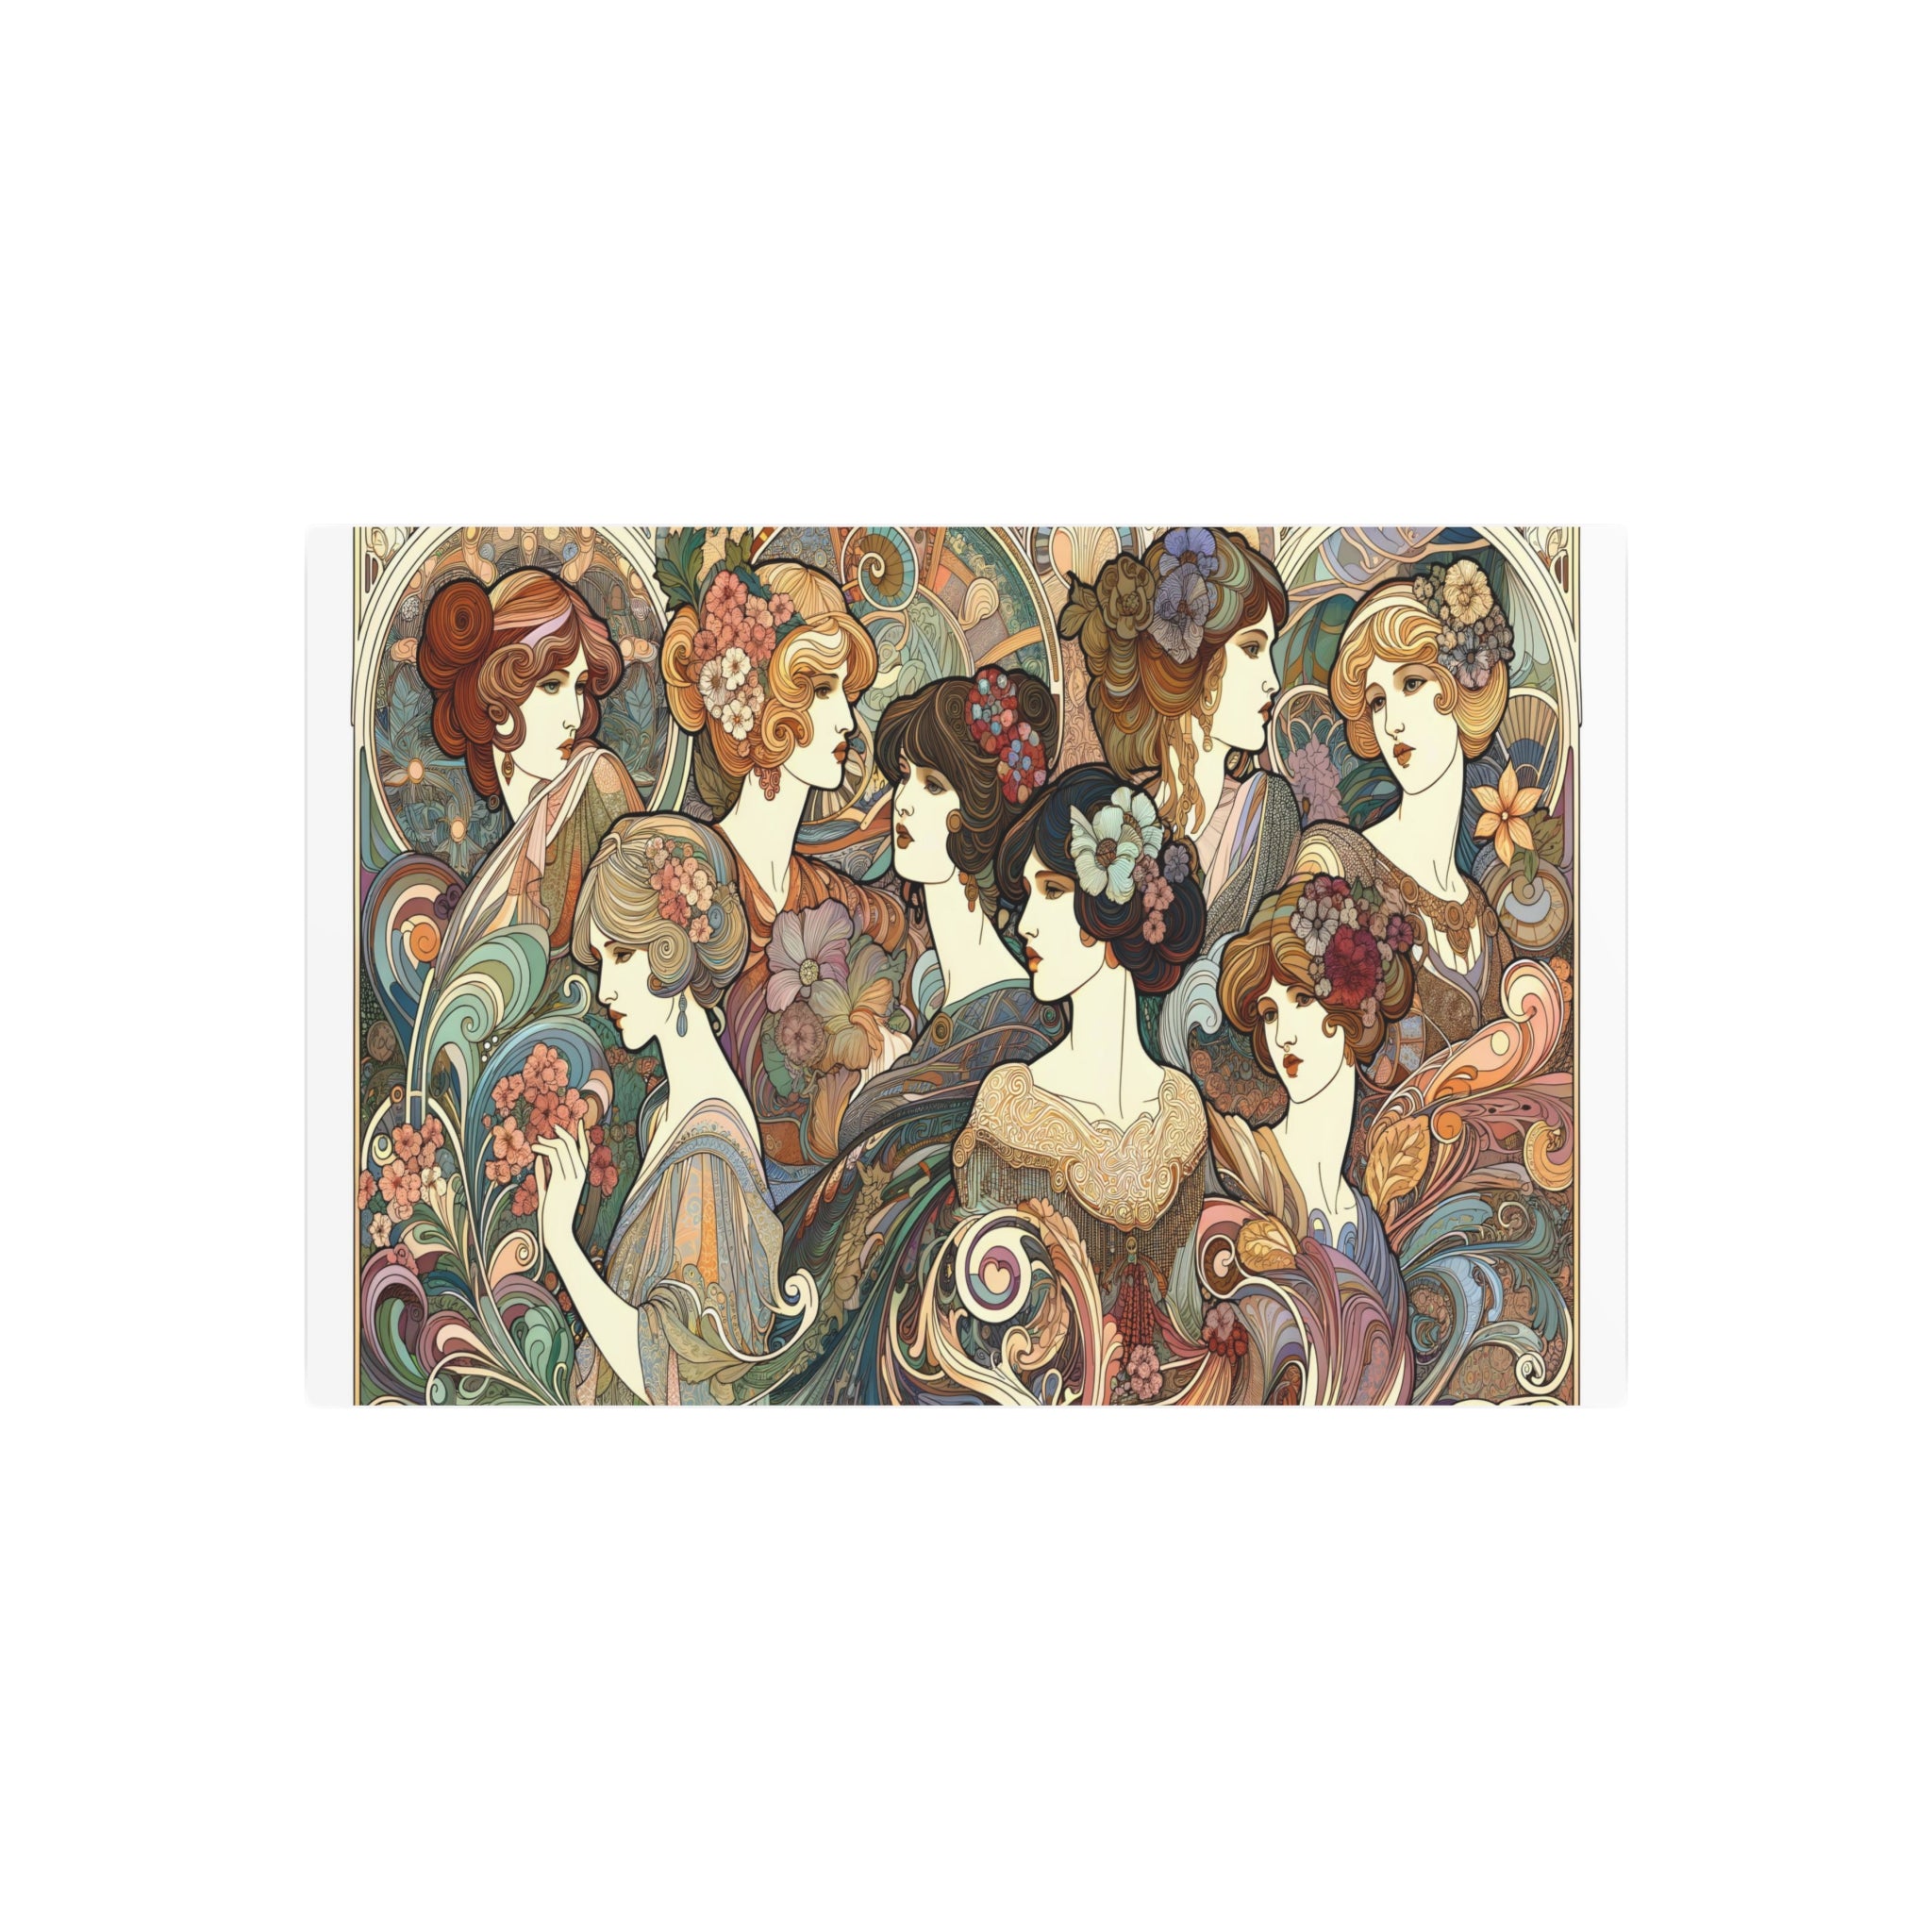 Metal Poster Art | "Art Nouveau Rich Hue Painting with Floral Motifs and Elegant Women - Vibrant Western Art Style"